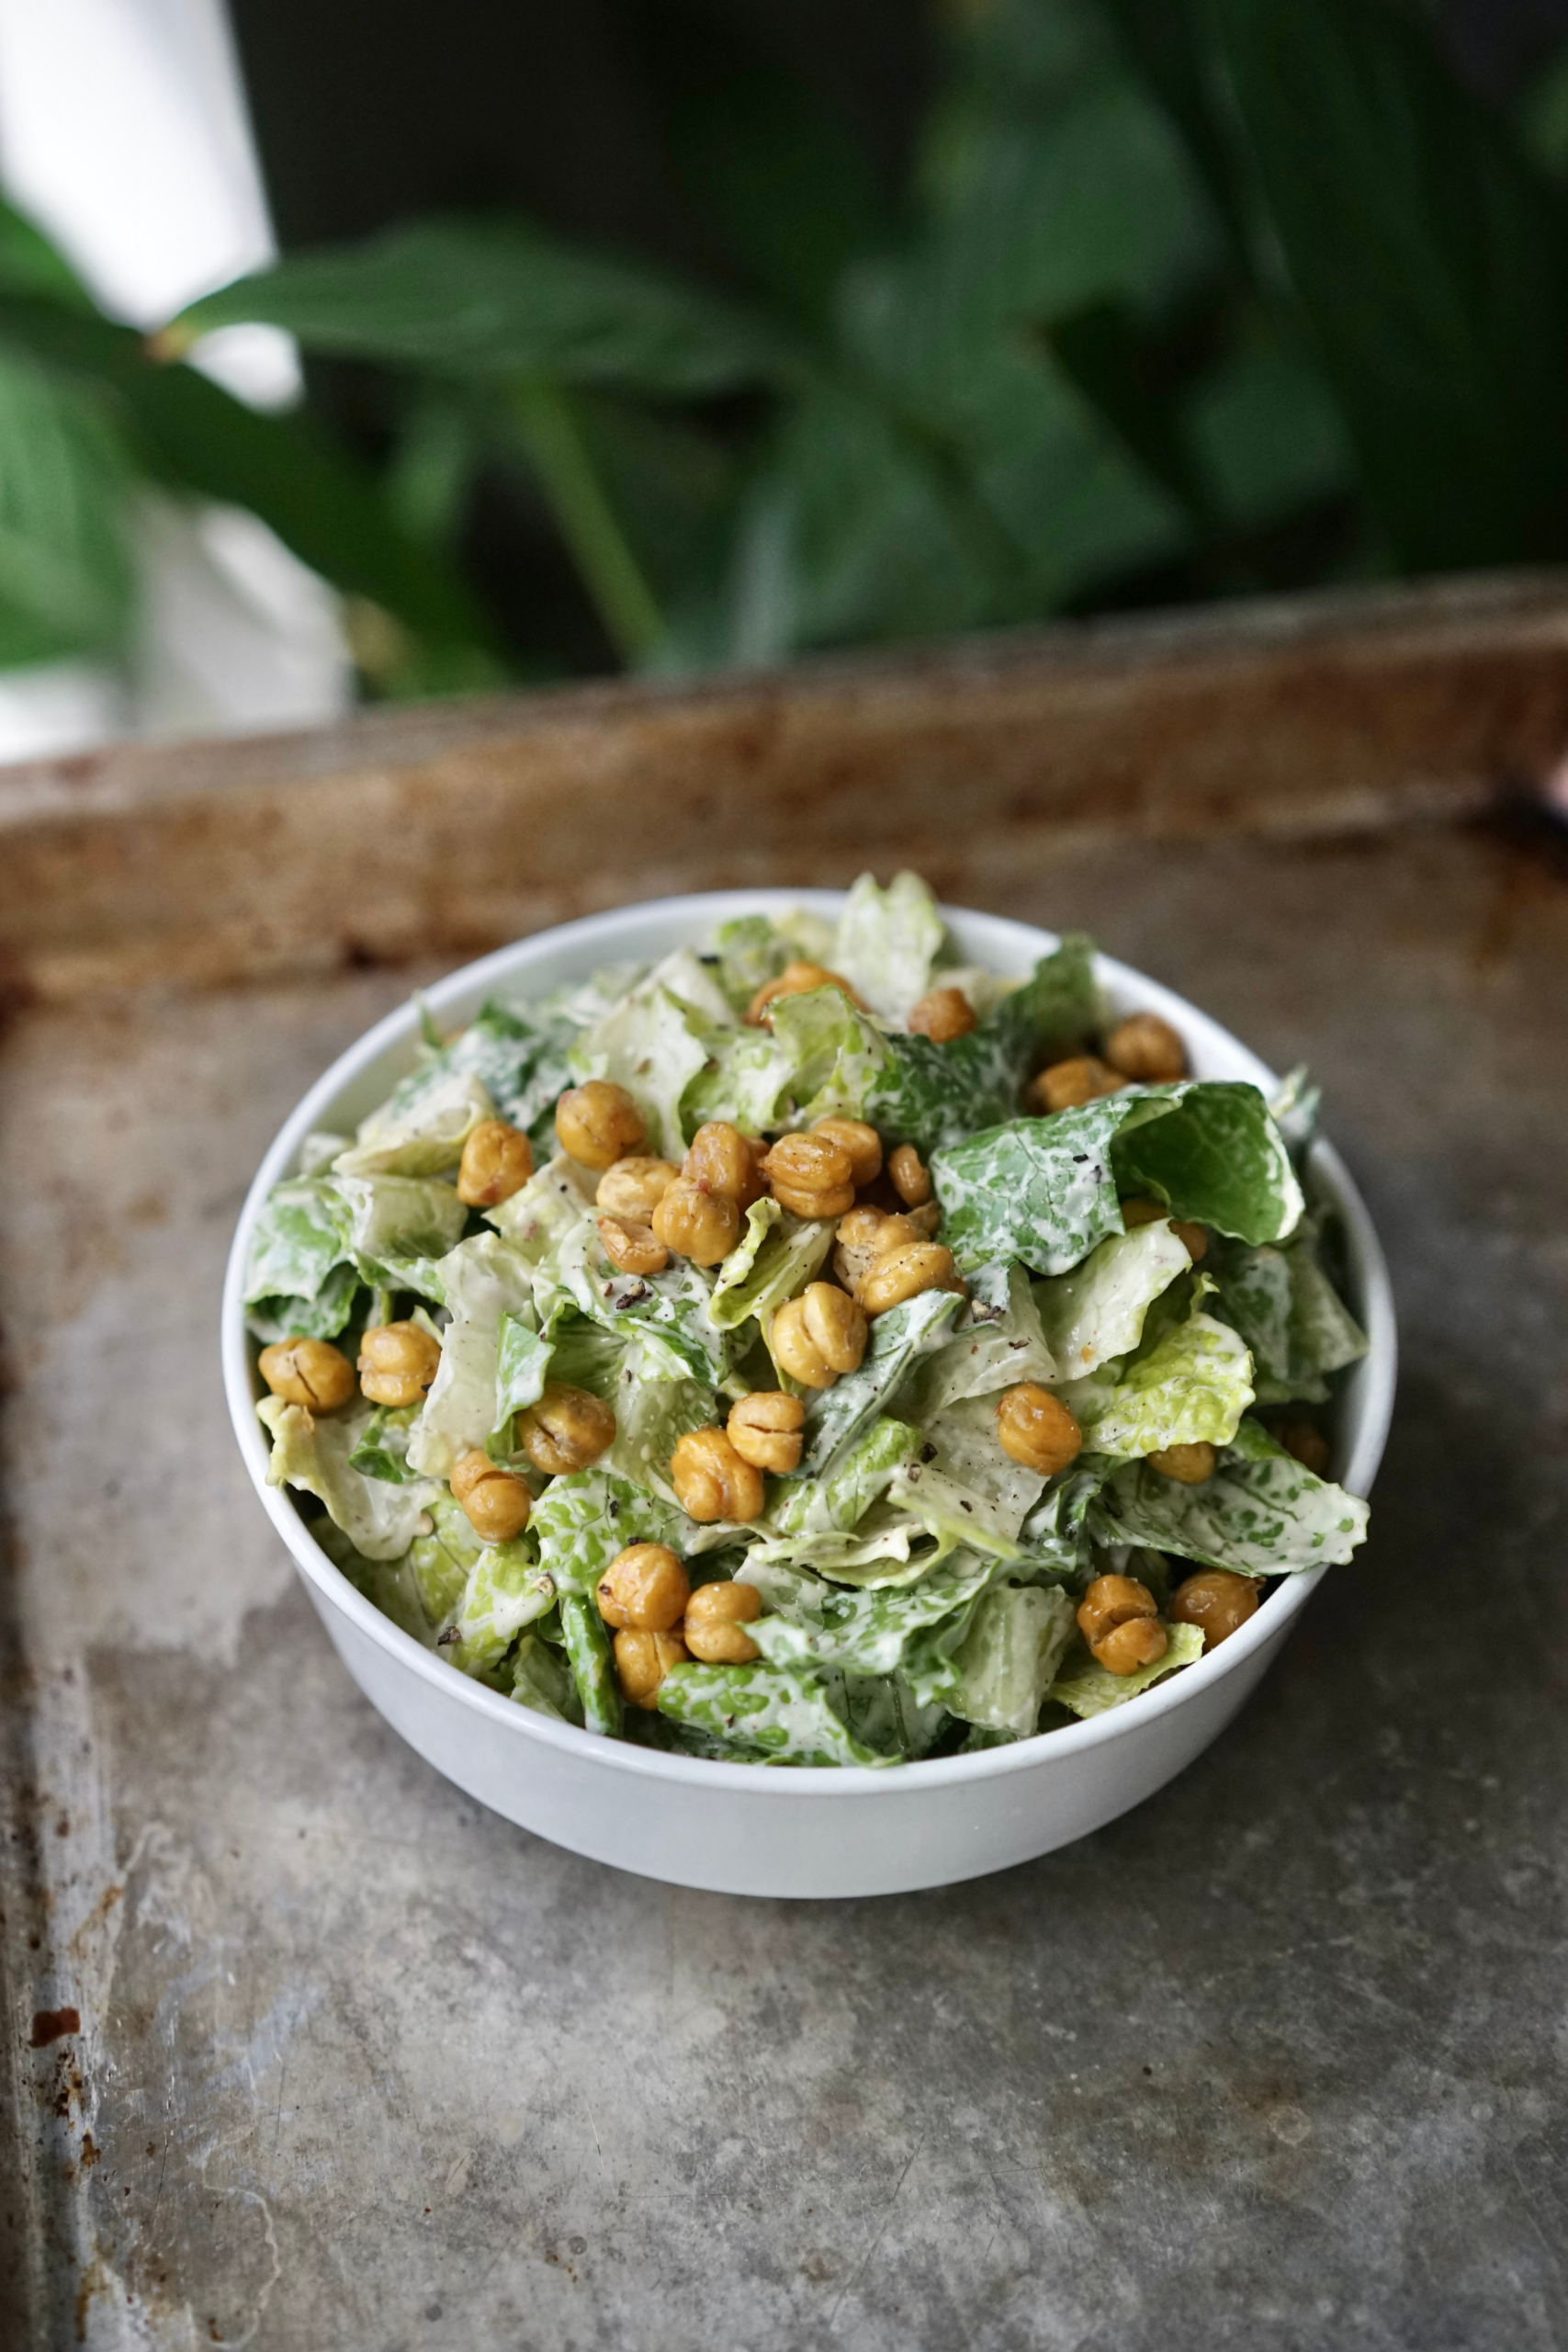 Spiced Vegan Tahini Caesar Salad with Crispy Chickpea Croutons | Living Healthy in Seattle